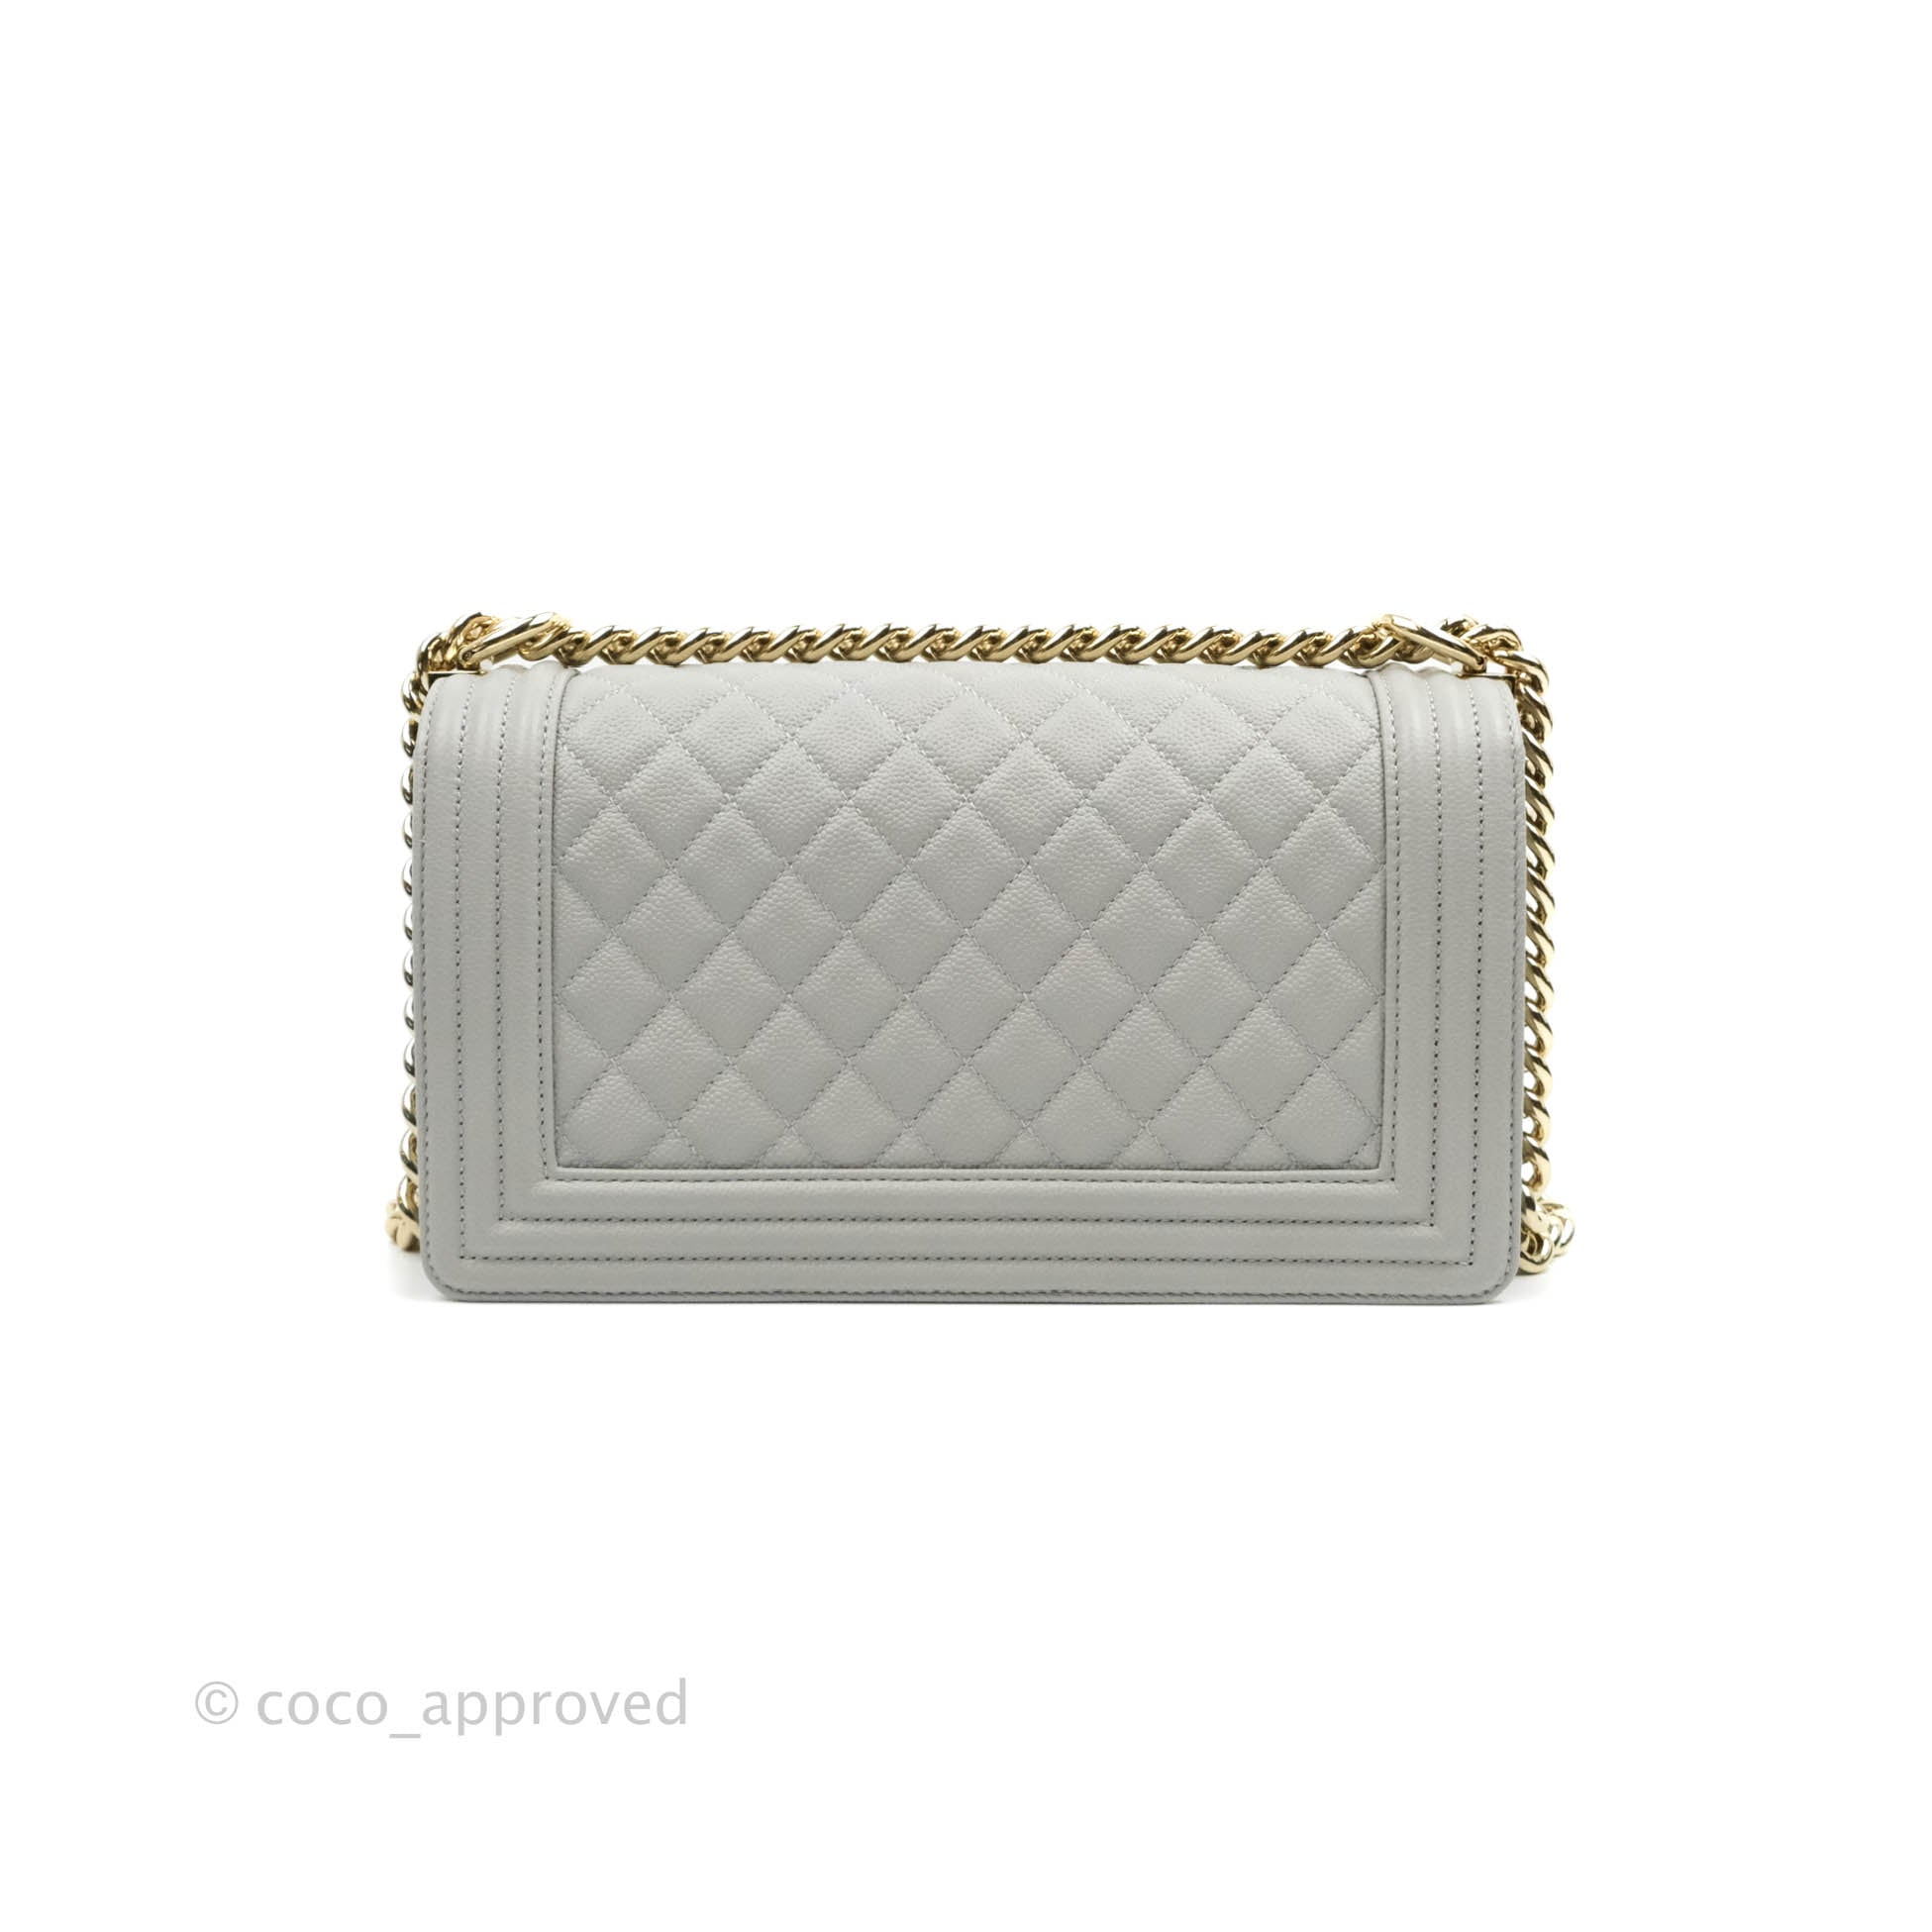 CHANEL Boy Quilted Medium Bags & Handbags for Women for sale